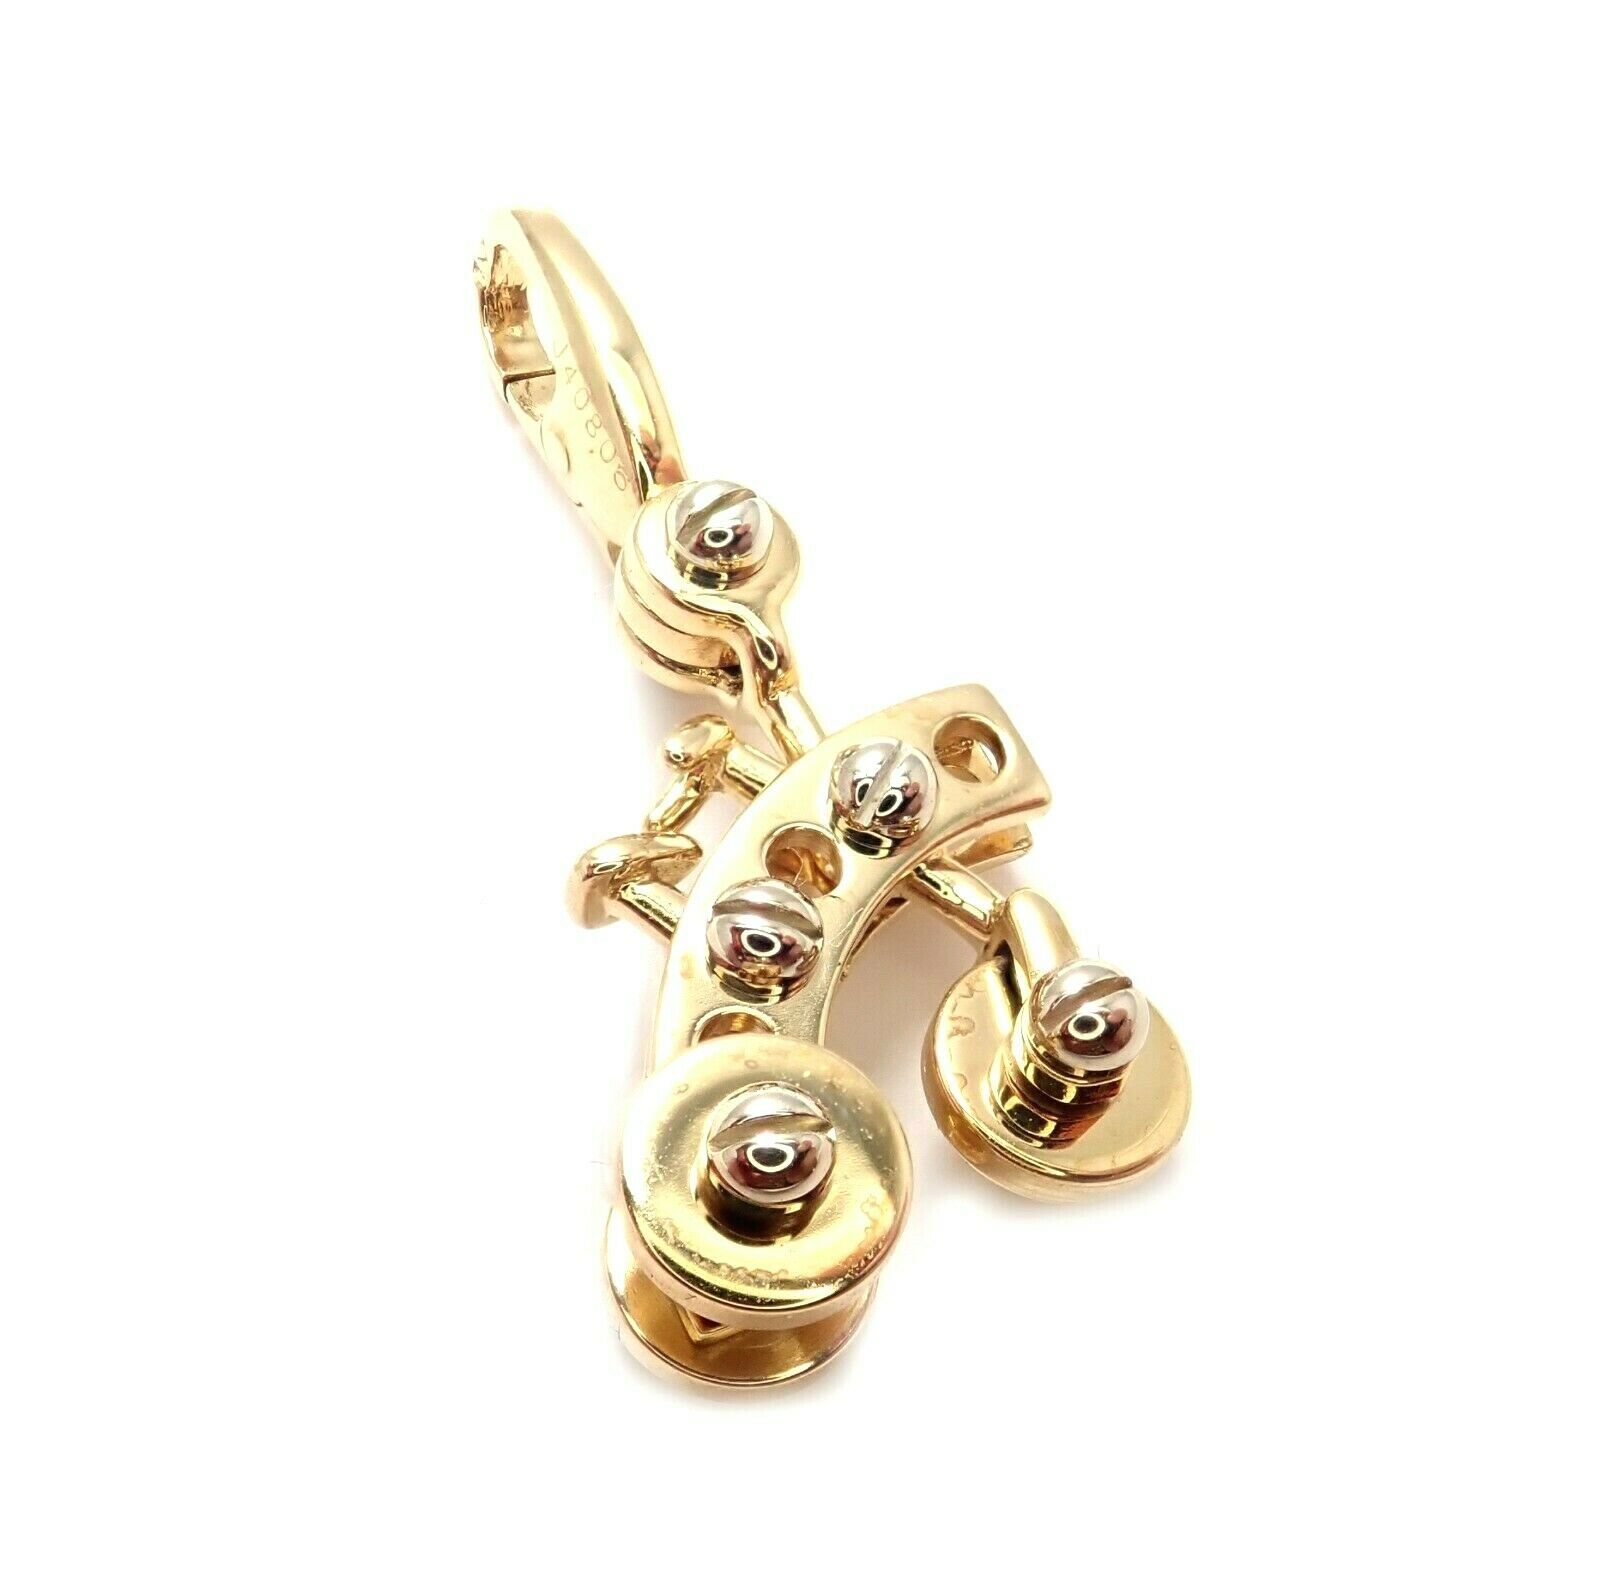 Authentic! Vintage Cartier 18k Yellow Gold Tricycle Bicycle Charm Pendant 2000 - $1,965.60